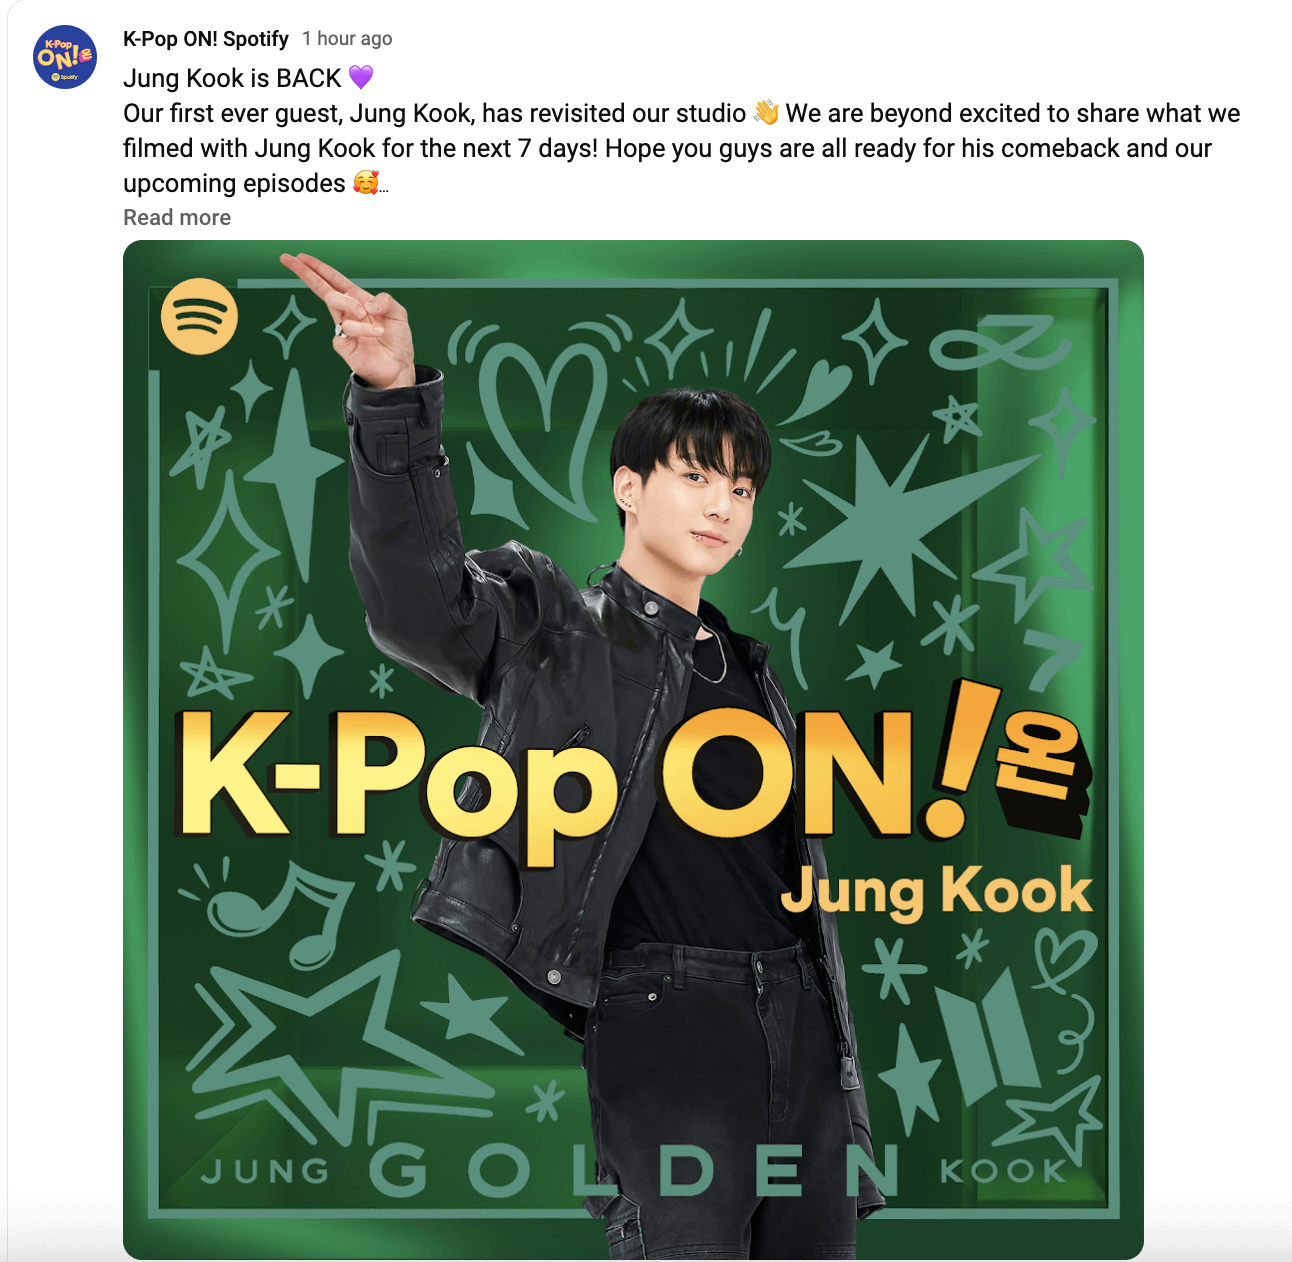 231101 K-Pop ON! Spotify will release content with Jungkook for the next 7 days